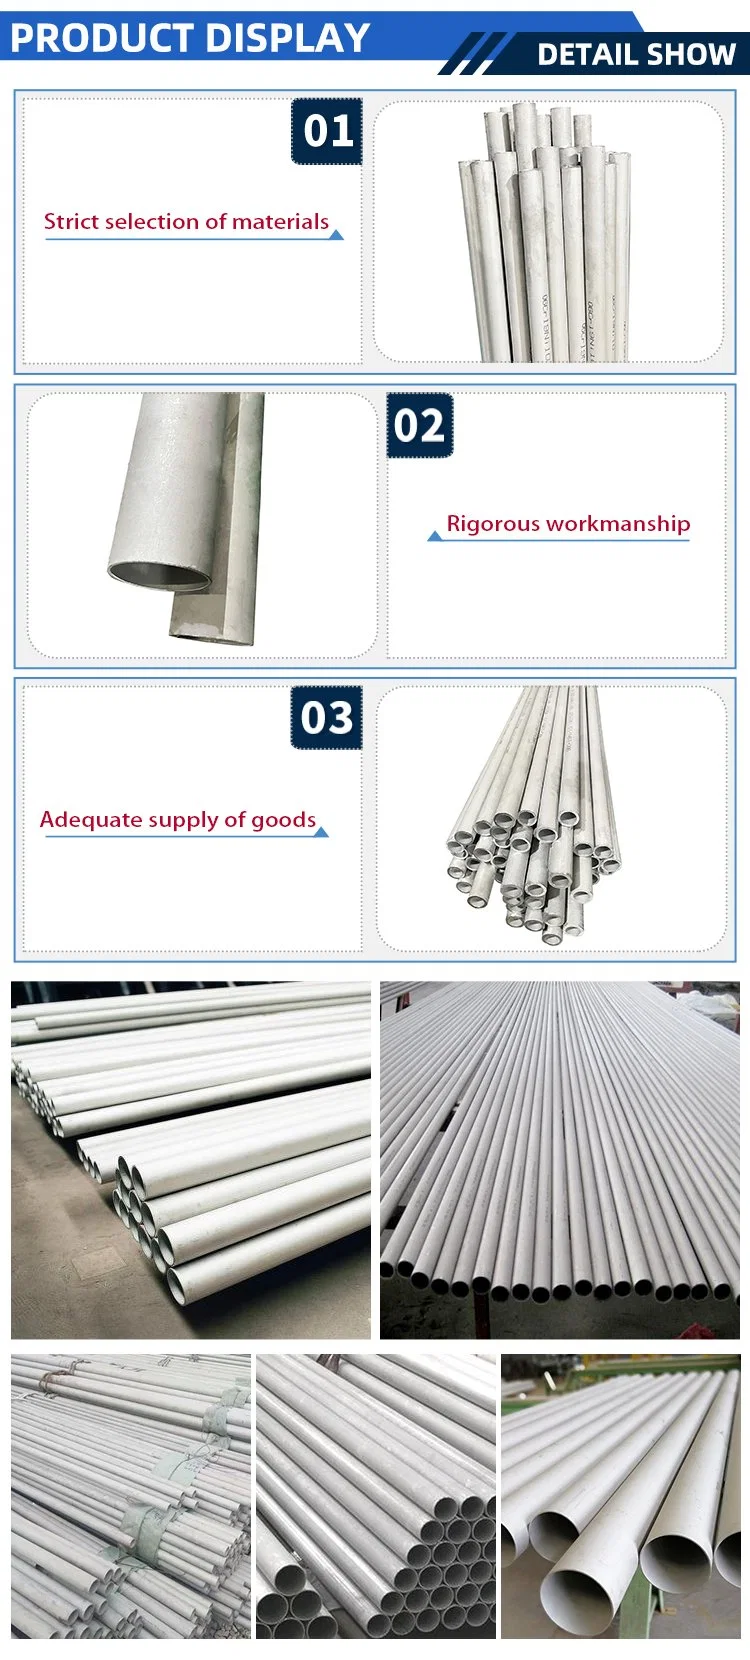 AISI Seamless Duplex Stainless Steel Round Pipe with Polished 201 304 304L 316L 316 310S 309 409 904 Ss Inox Smls Iron Metal ASTM SUS Welded Cold Drawing Bright